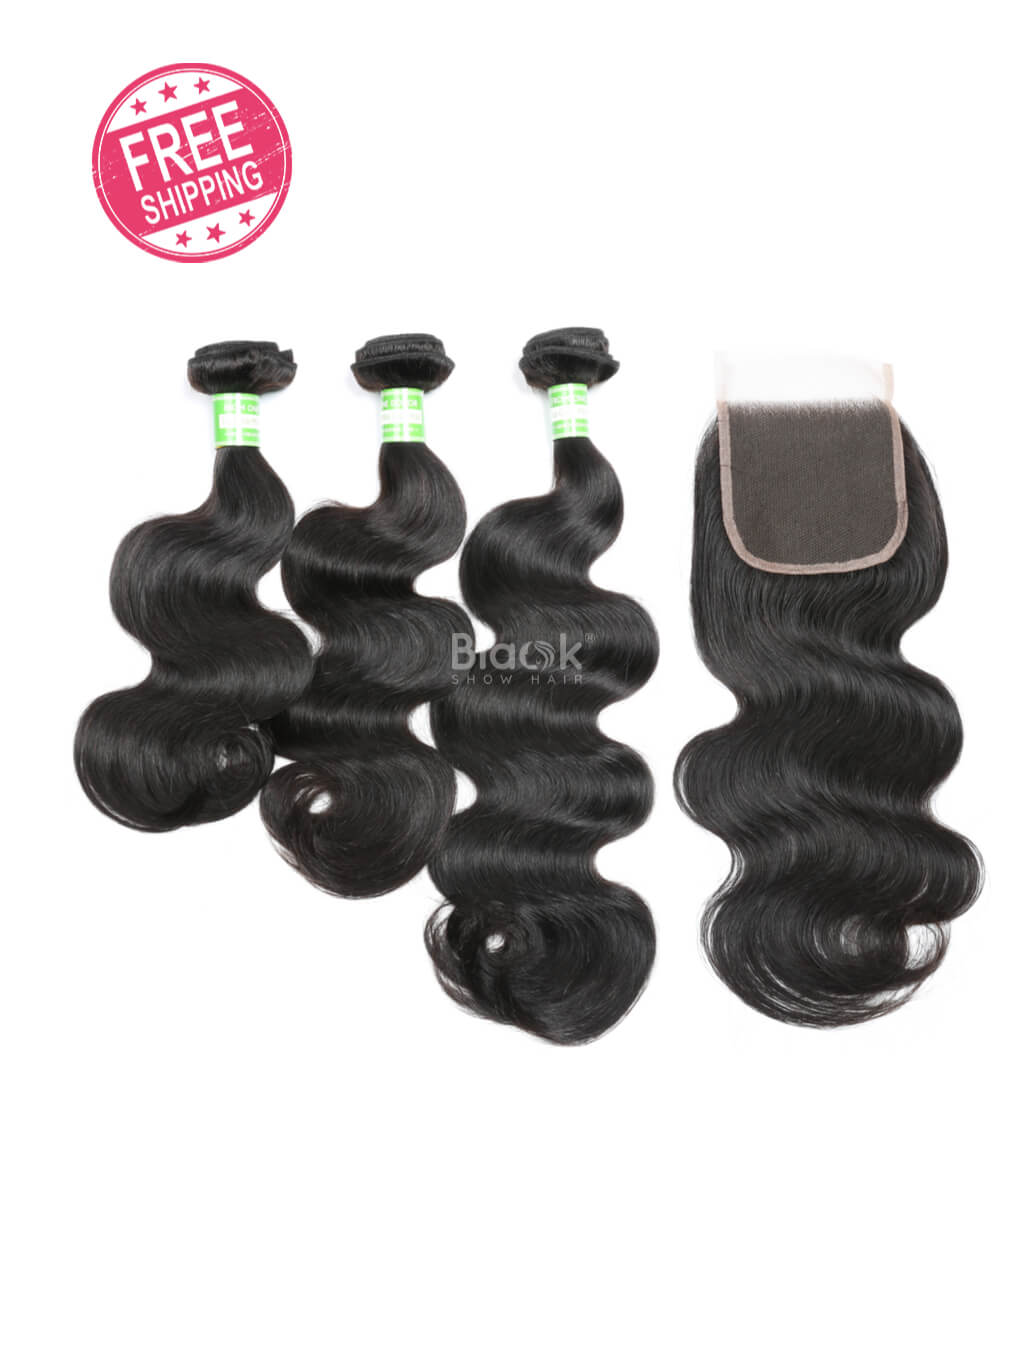 body wave bundles with closure 4x4 indian hair